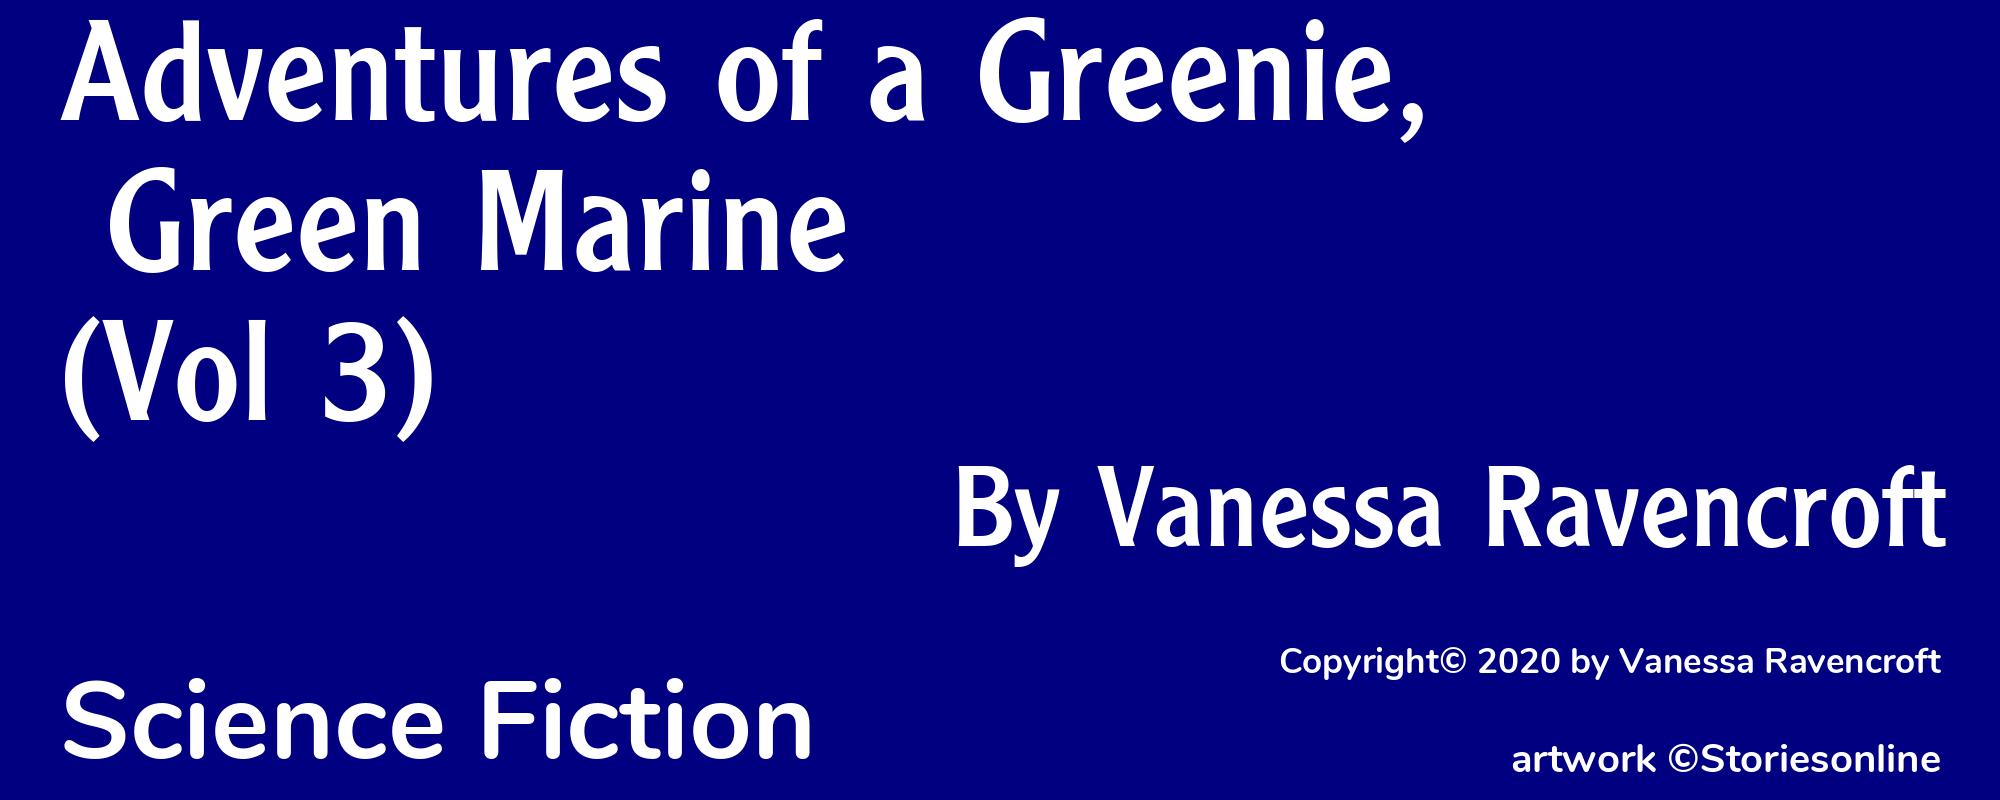 Adventures of a Greenie, Green Marine (Vol 3) - Cover